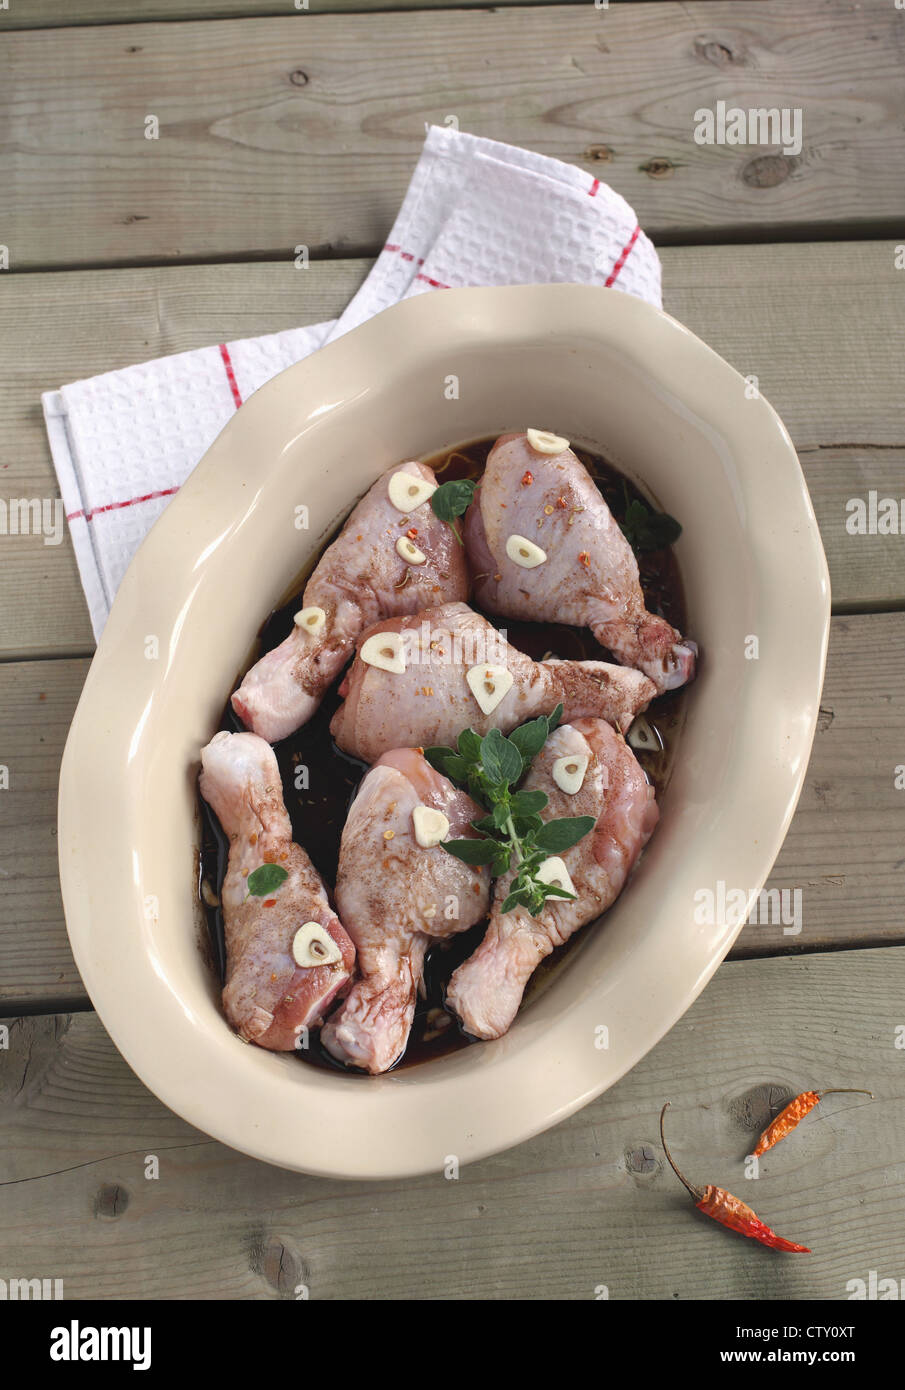 Uncooked chicken in a baking dish with spices Stock Photo